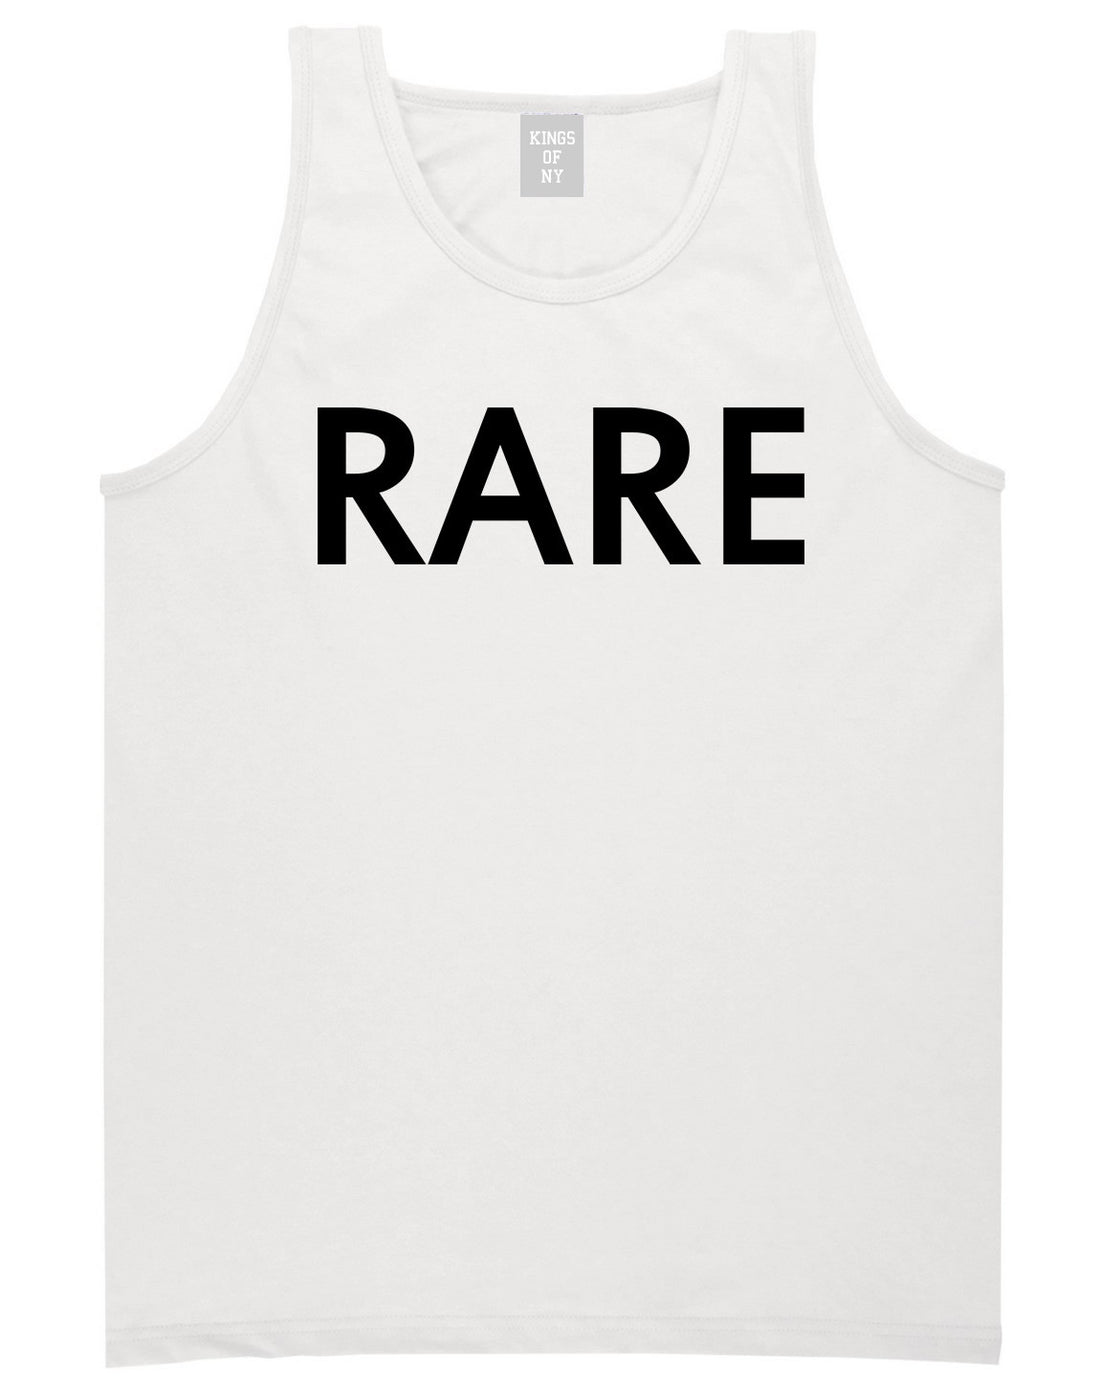 Kings Of NY Rare Tank Top in White